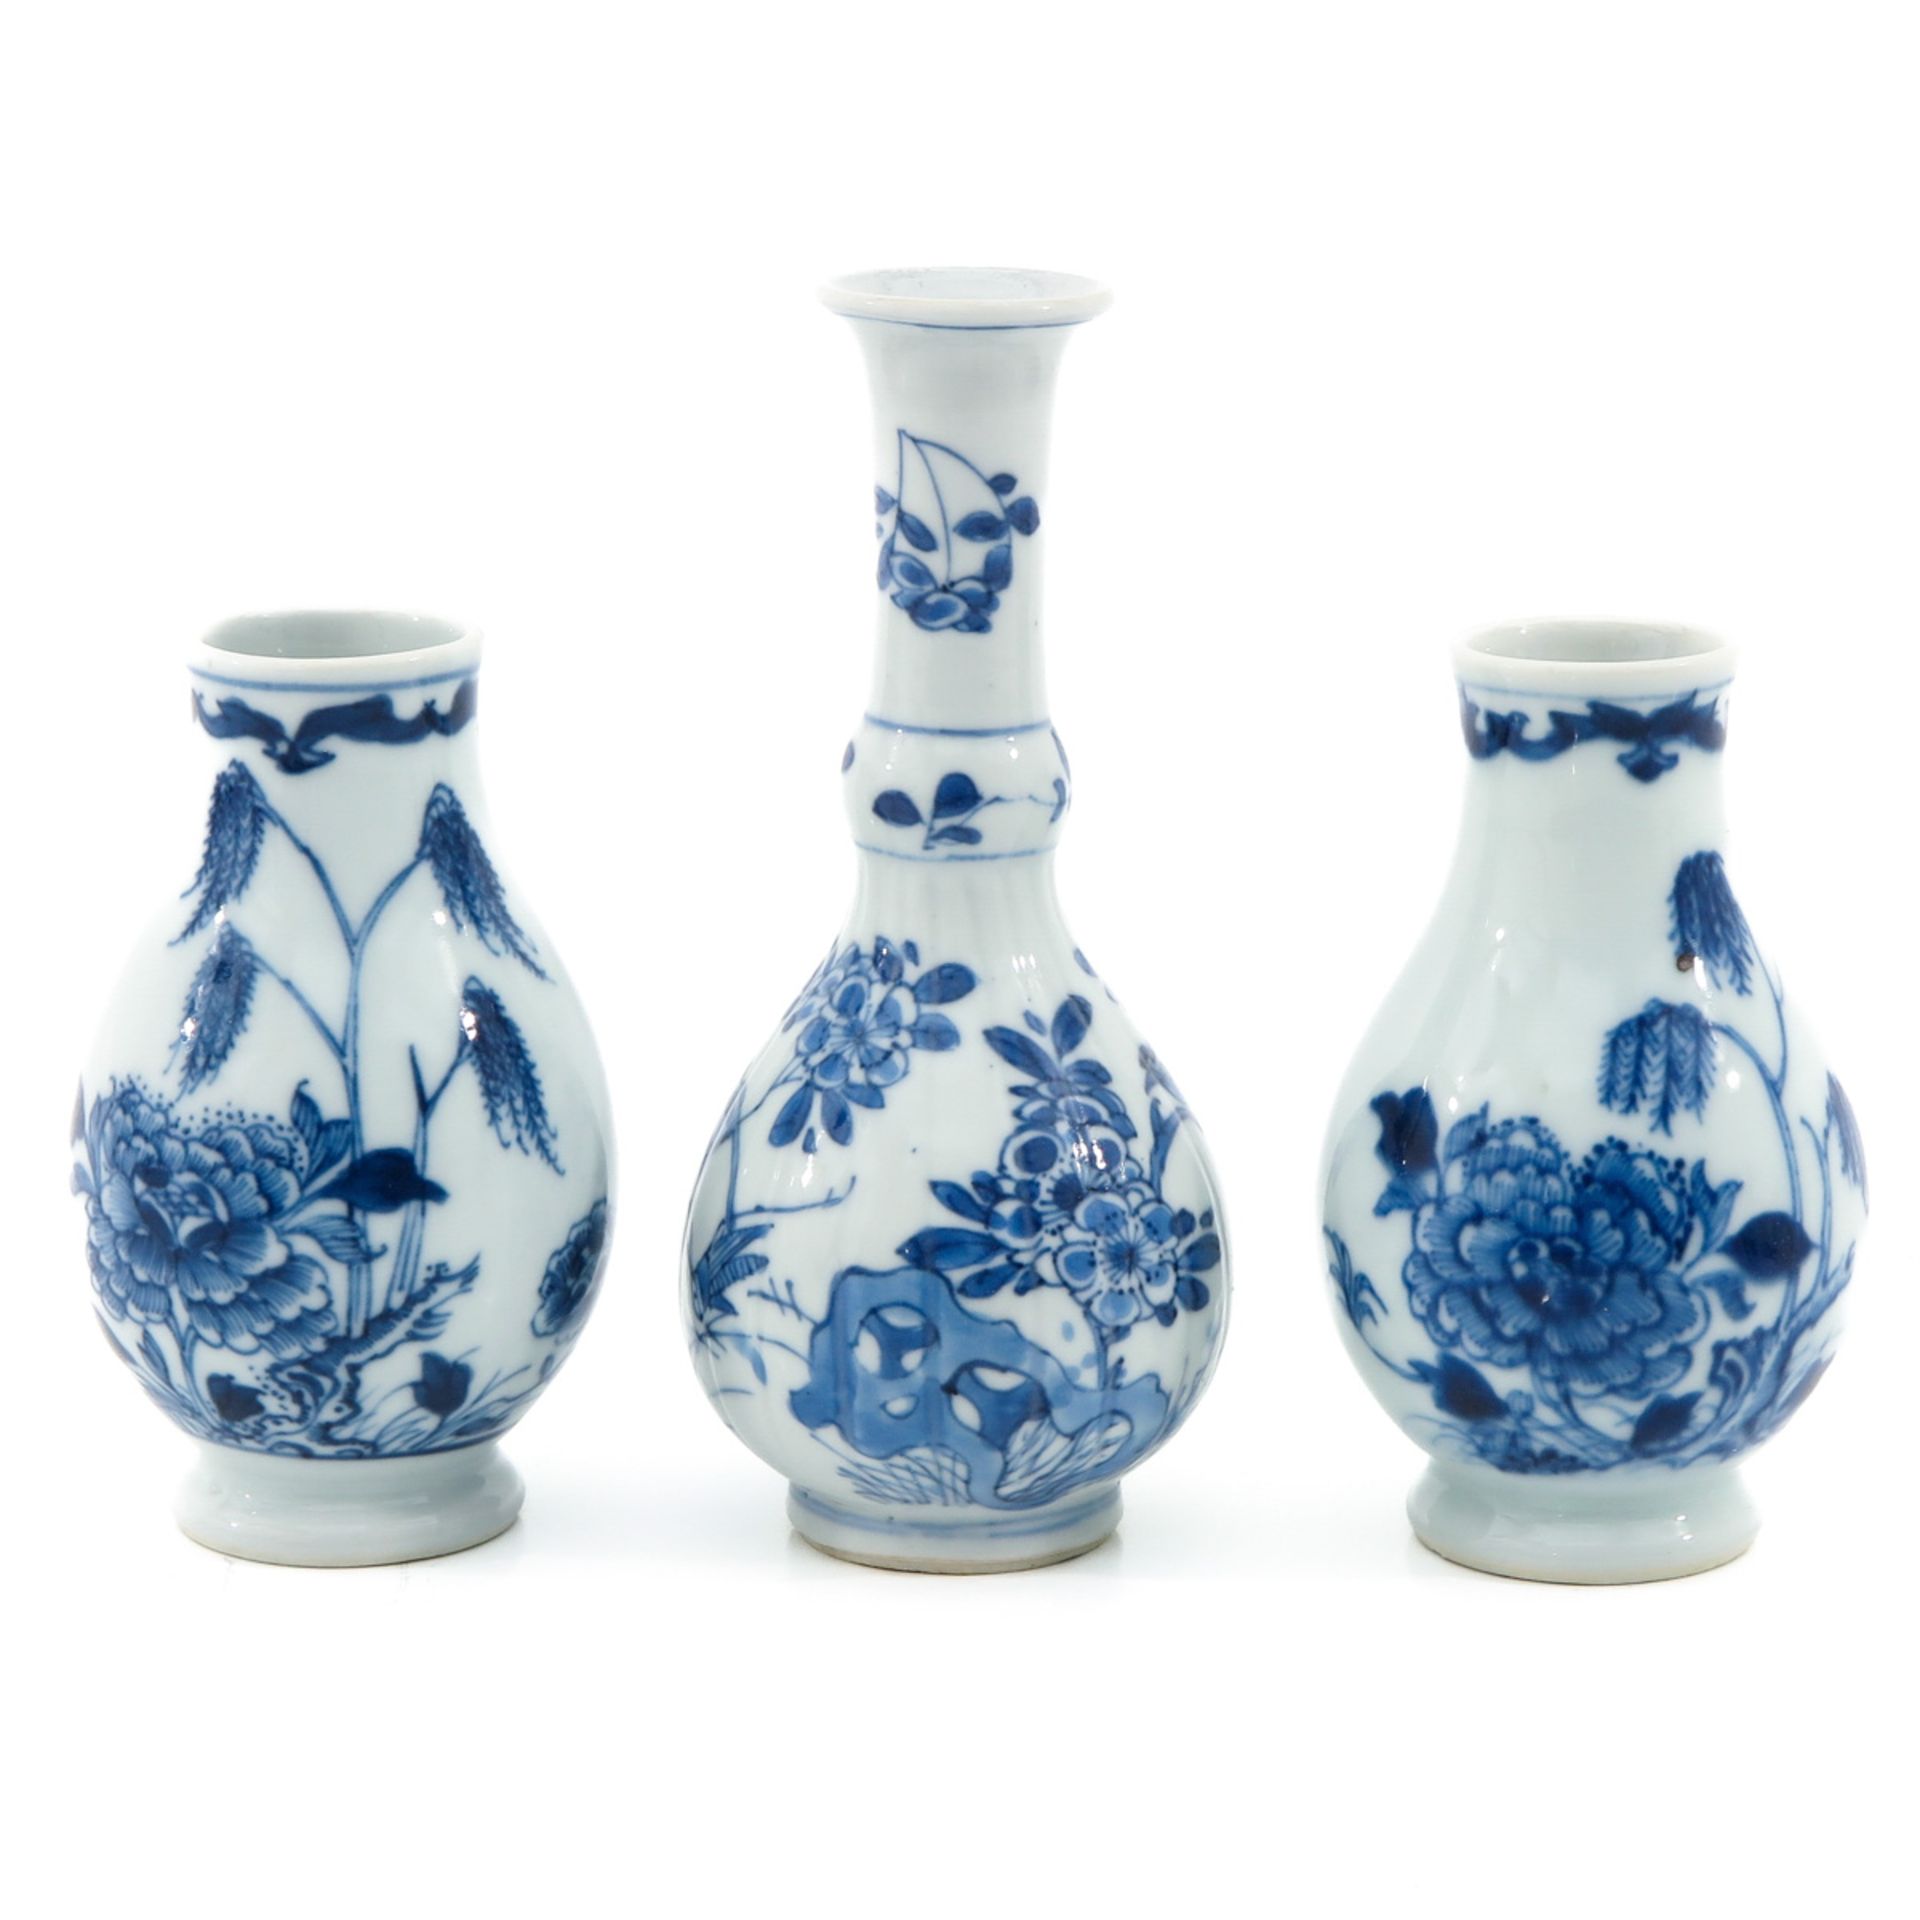 A Collection of 3 Small Vases